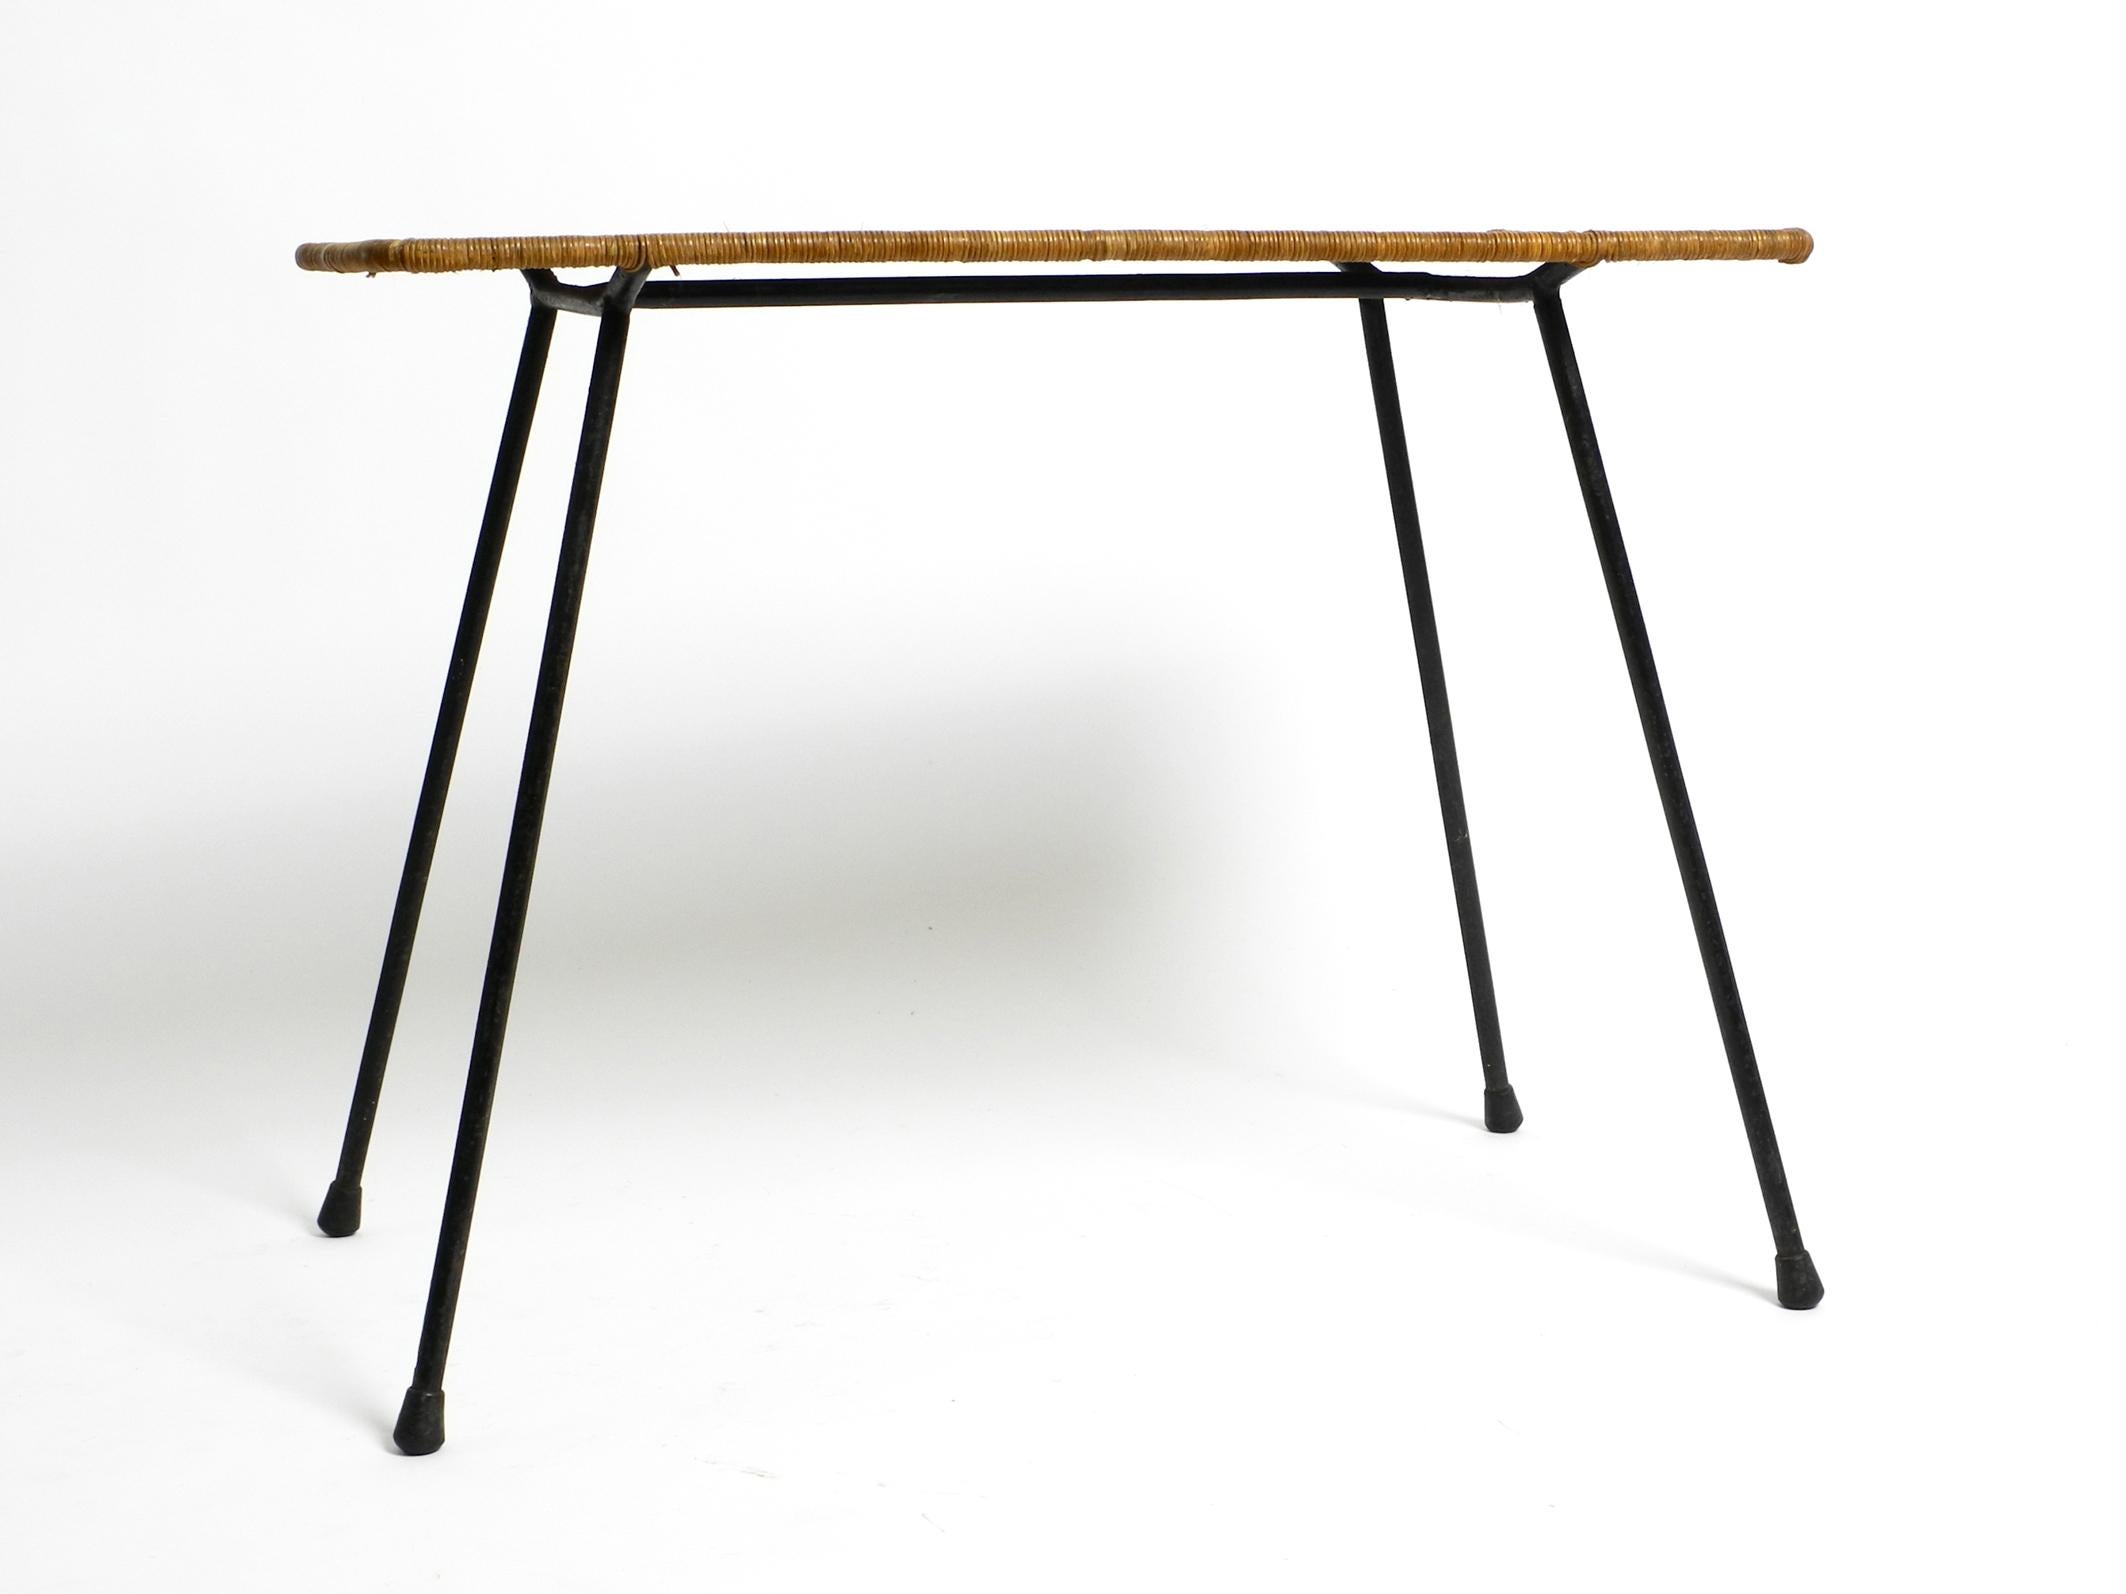 Mid-20th Century Italian Mid-Century Modern Rattan Side or Coffee Table with a Heavy Iron Frame For Sale